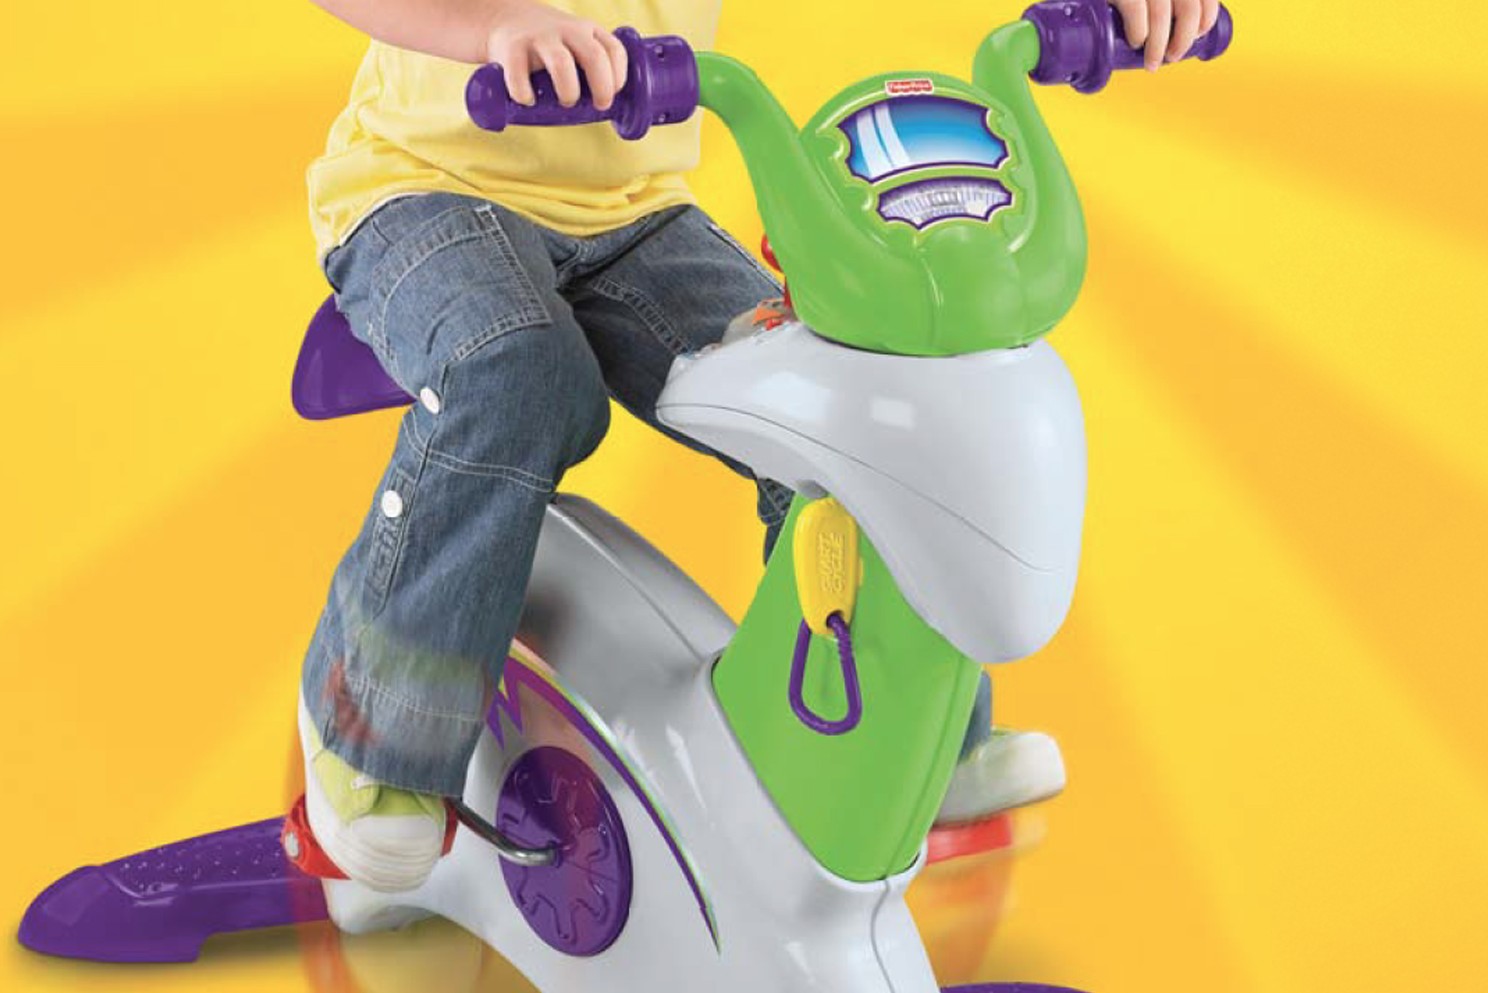 fisher price smart cycle racer